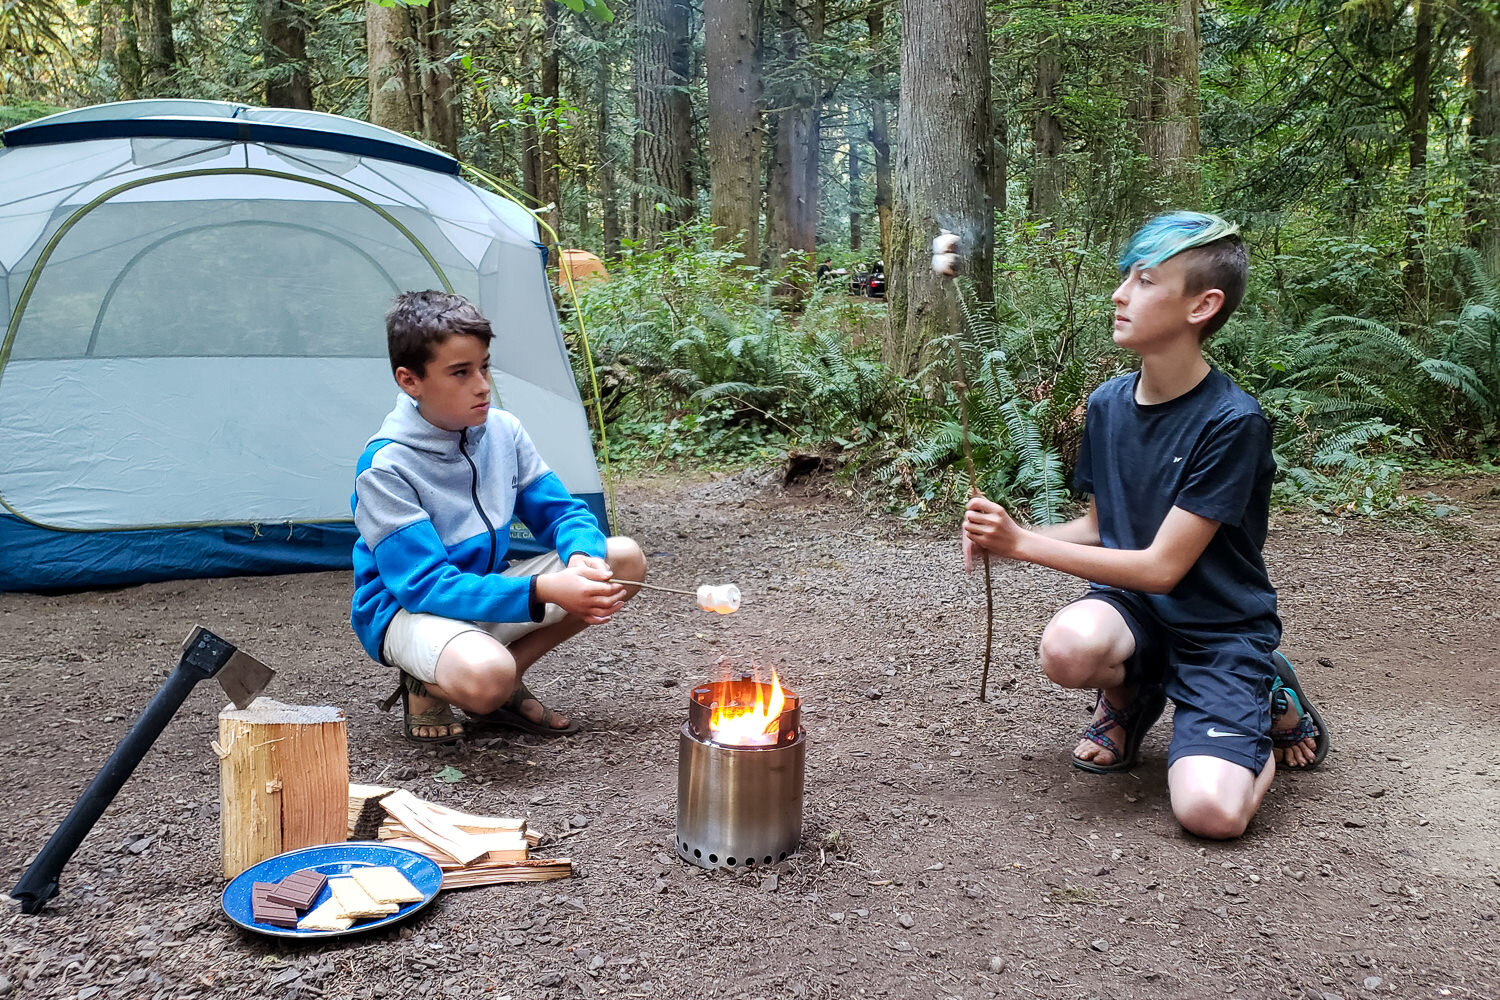 The Solo Stove Campfire is both entertainment and a fun way to cook on car camping trips.